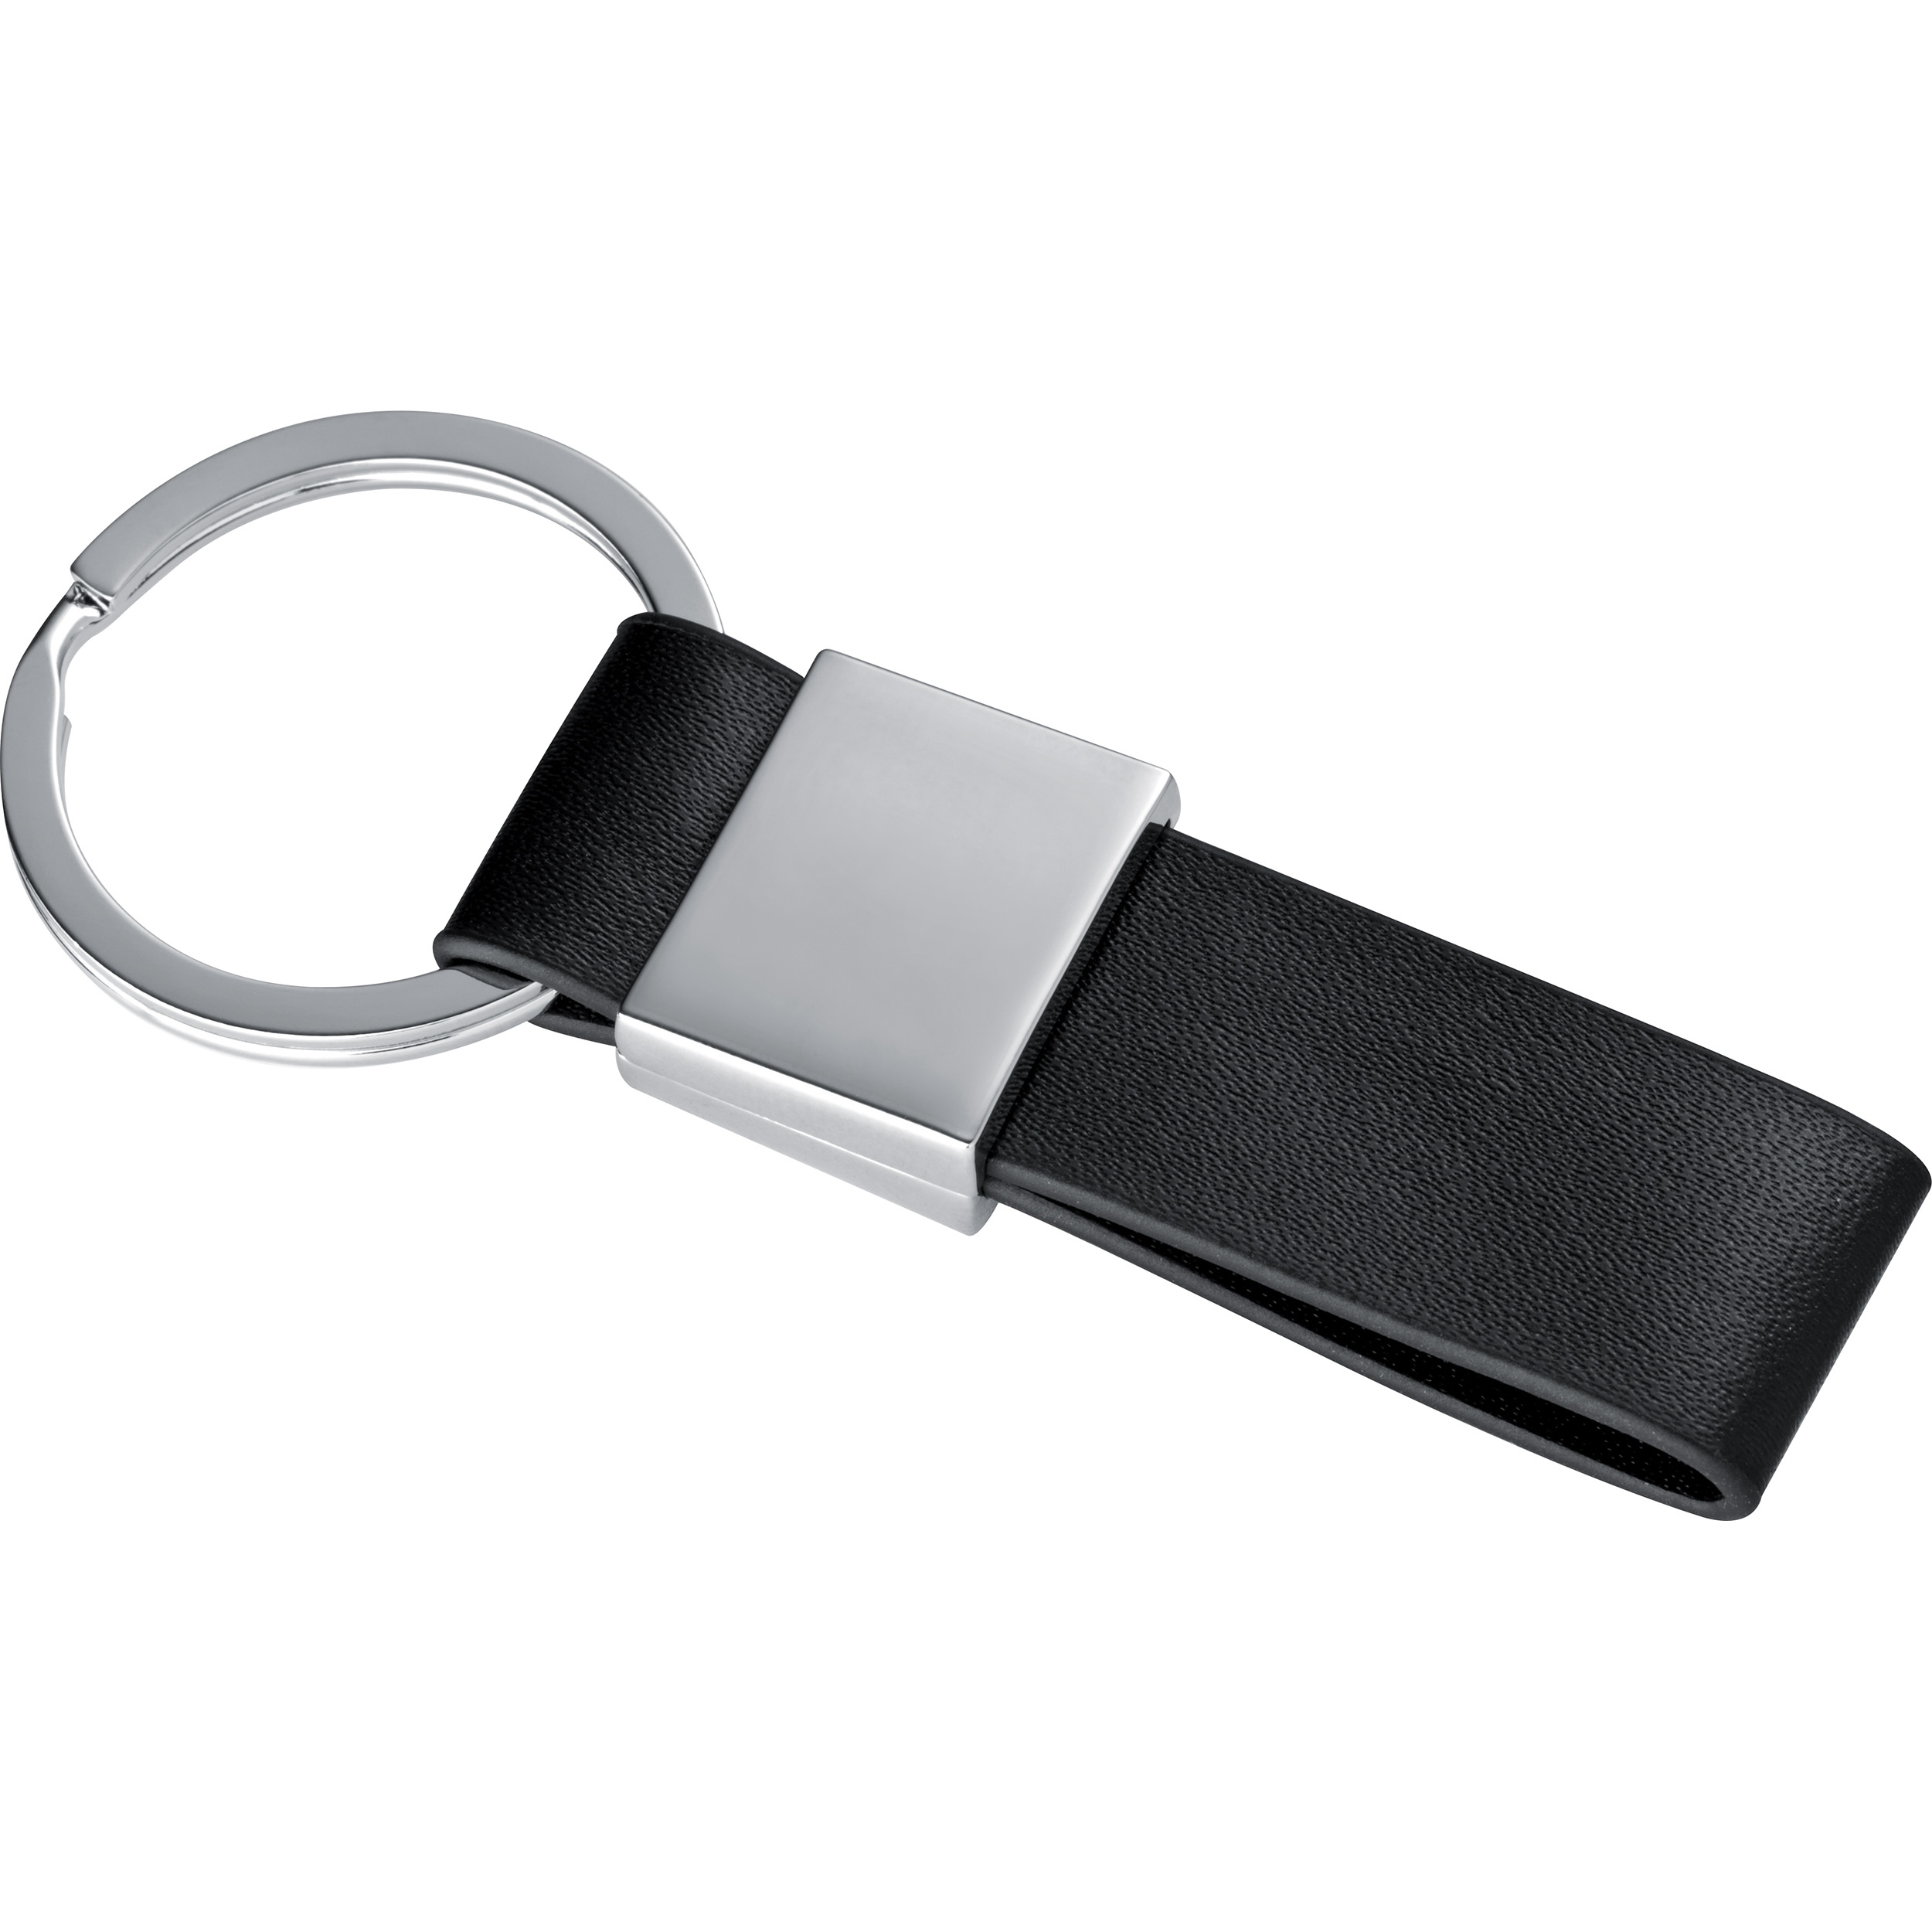 A keyring featuring an engraved logo, produced by Lymm - Tamworth